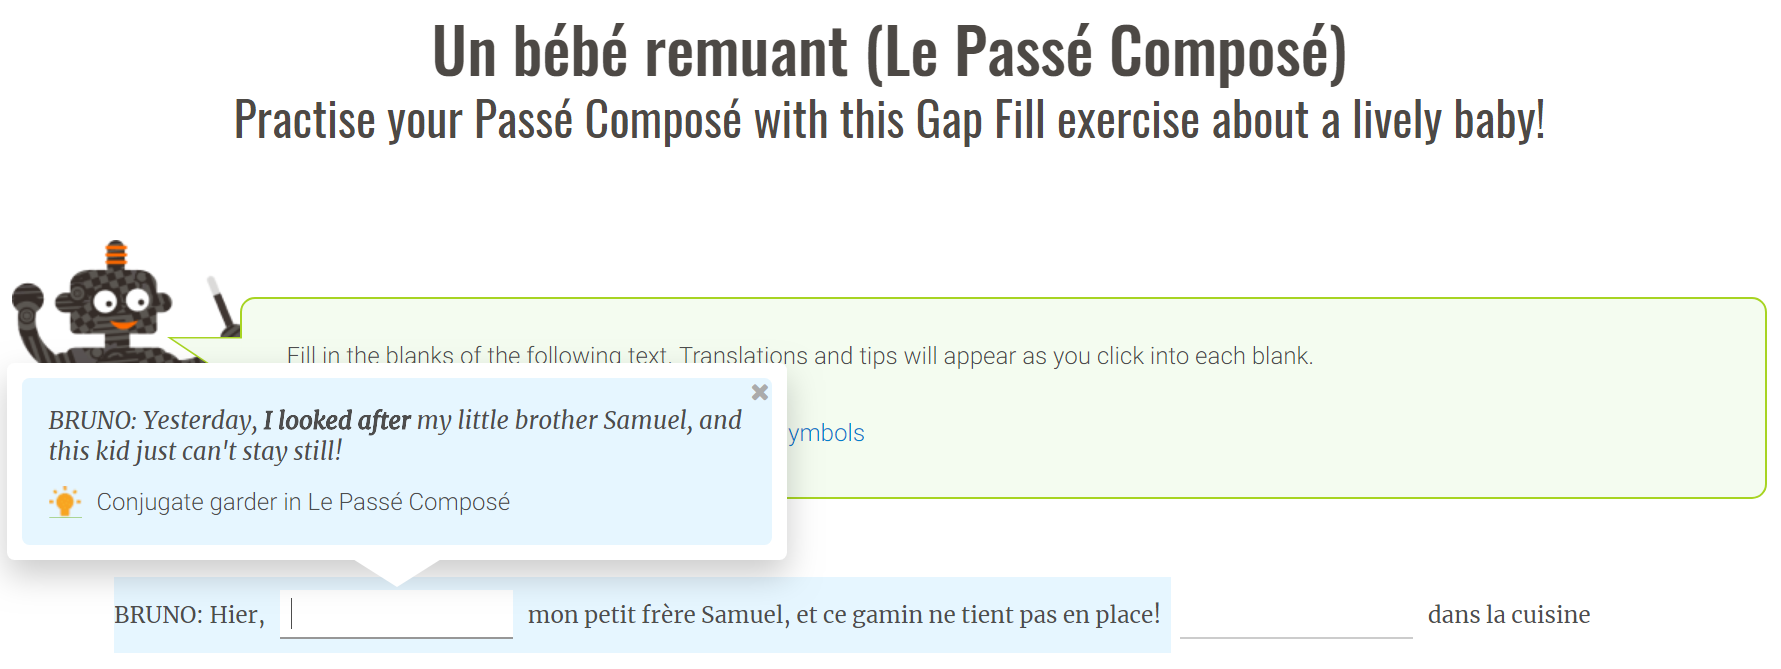 French gapfill exercise